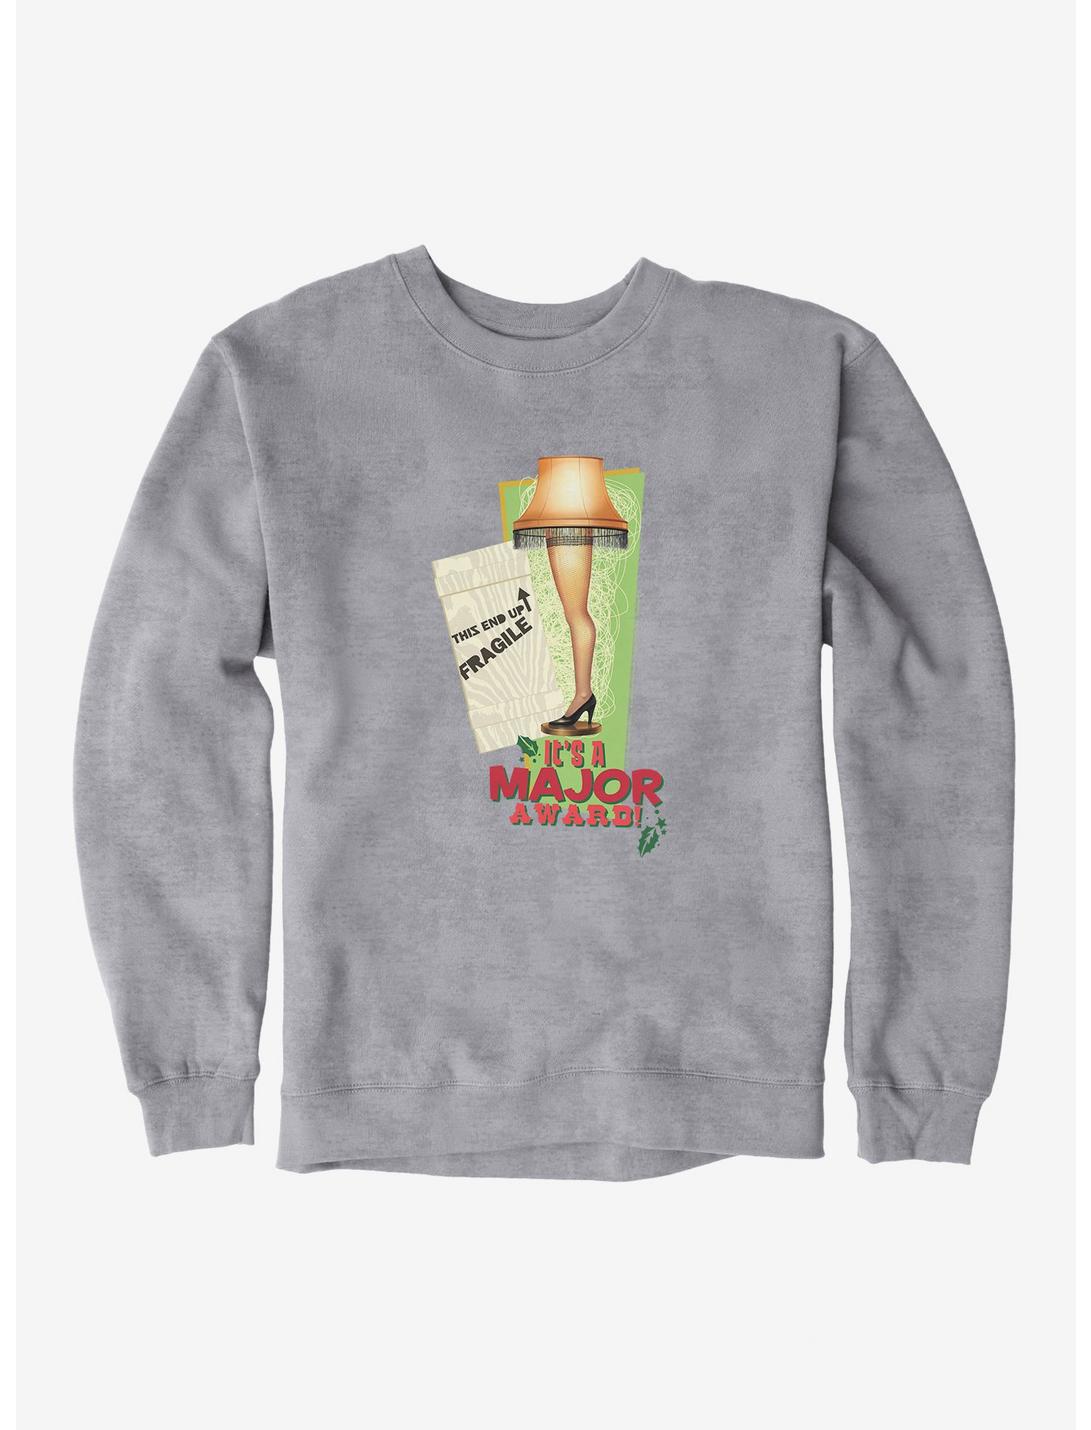 A Christmas Story This End Up Fragile Leg Lamp Sweatshirt, HEATHER GREY, hi-res